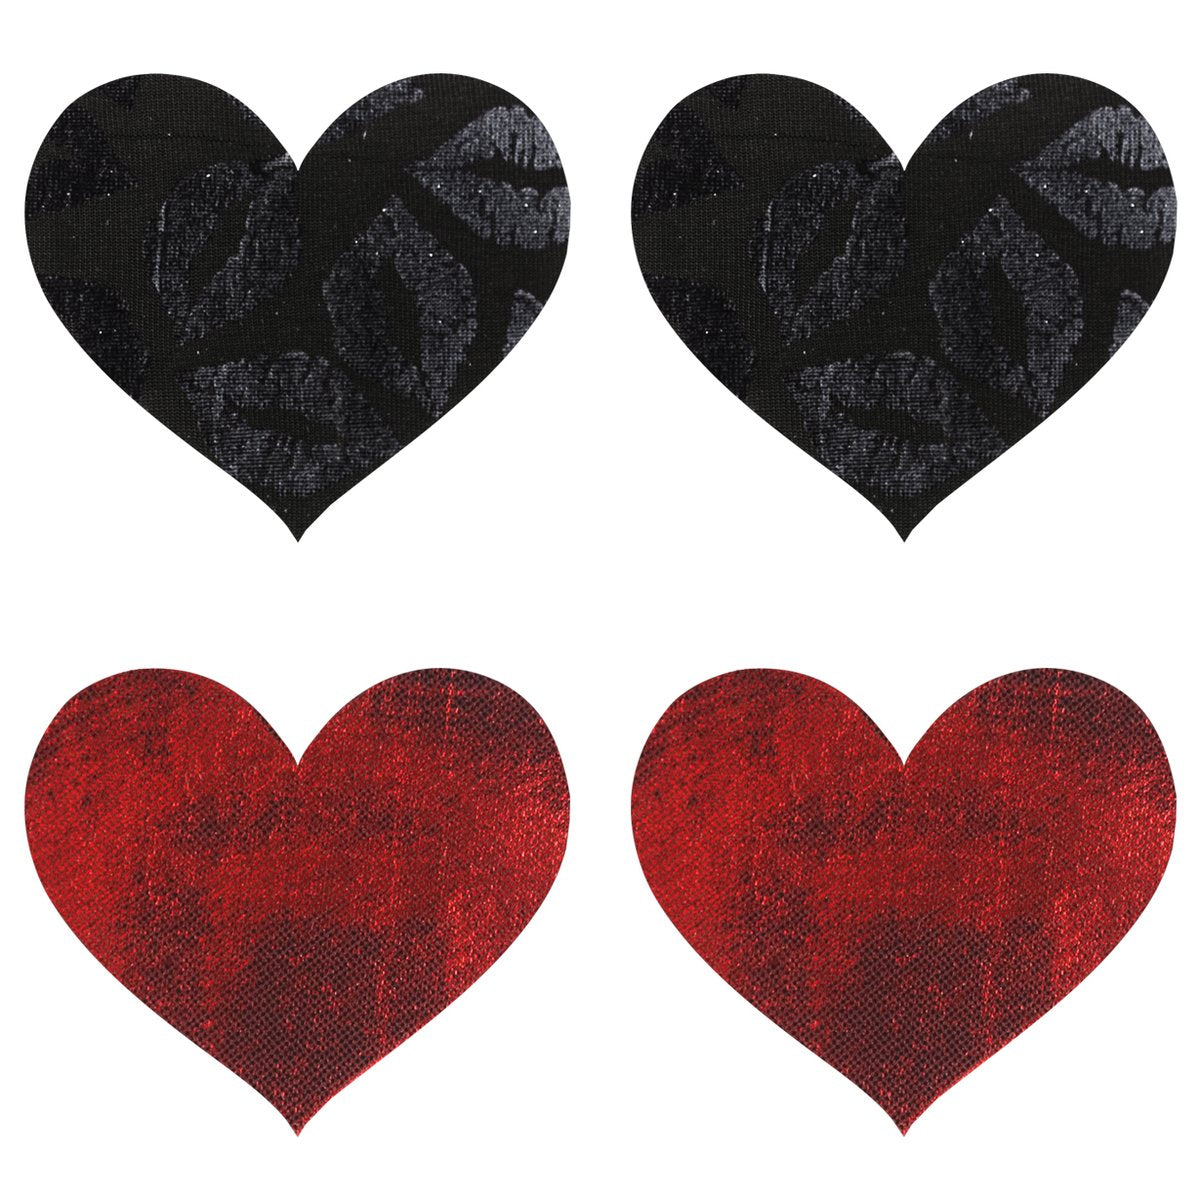 SHOP Peekaboo Pasties | Stolen Kisses Hearts Pasties - 2 Pair Set Red/Black Australia This 2-pair set of Peekaboo heart pasties offers an array of styling possibilities. Each set is made of quality materials for lasting wear, providing 8+ hours of coverage. The black pair features a lip kisses print, and the red pair has a shiny textured finish. Perfect for both risqué fashion and subtle cover-up, this set will add a flirty touch to any outfit. 